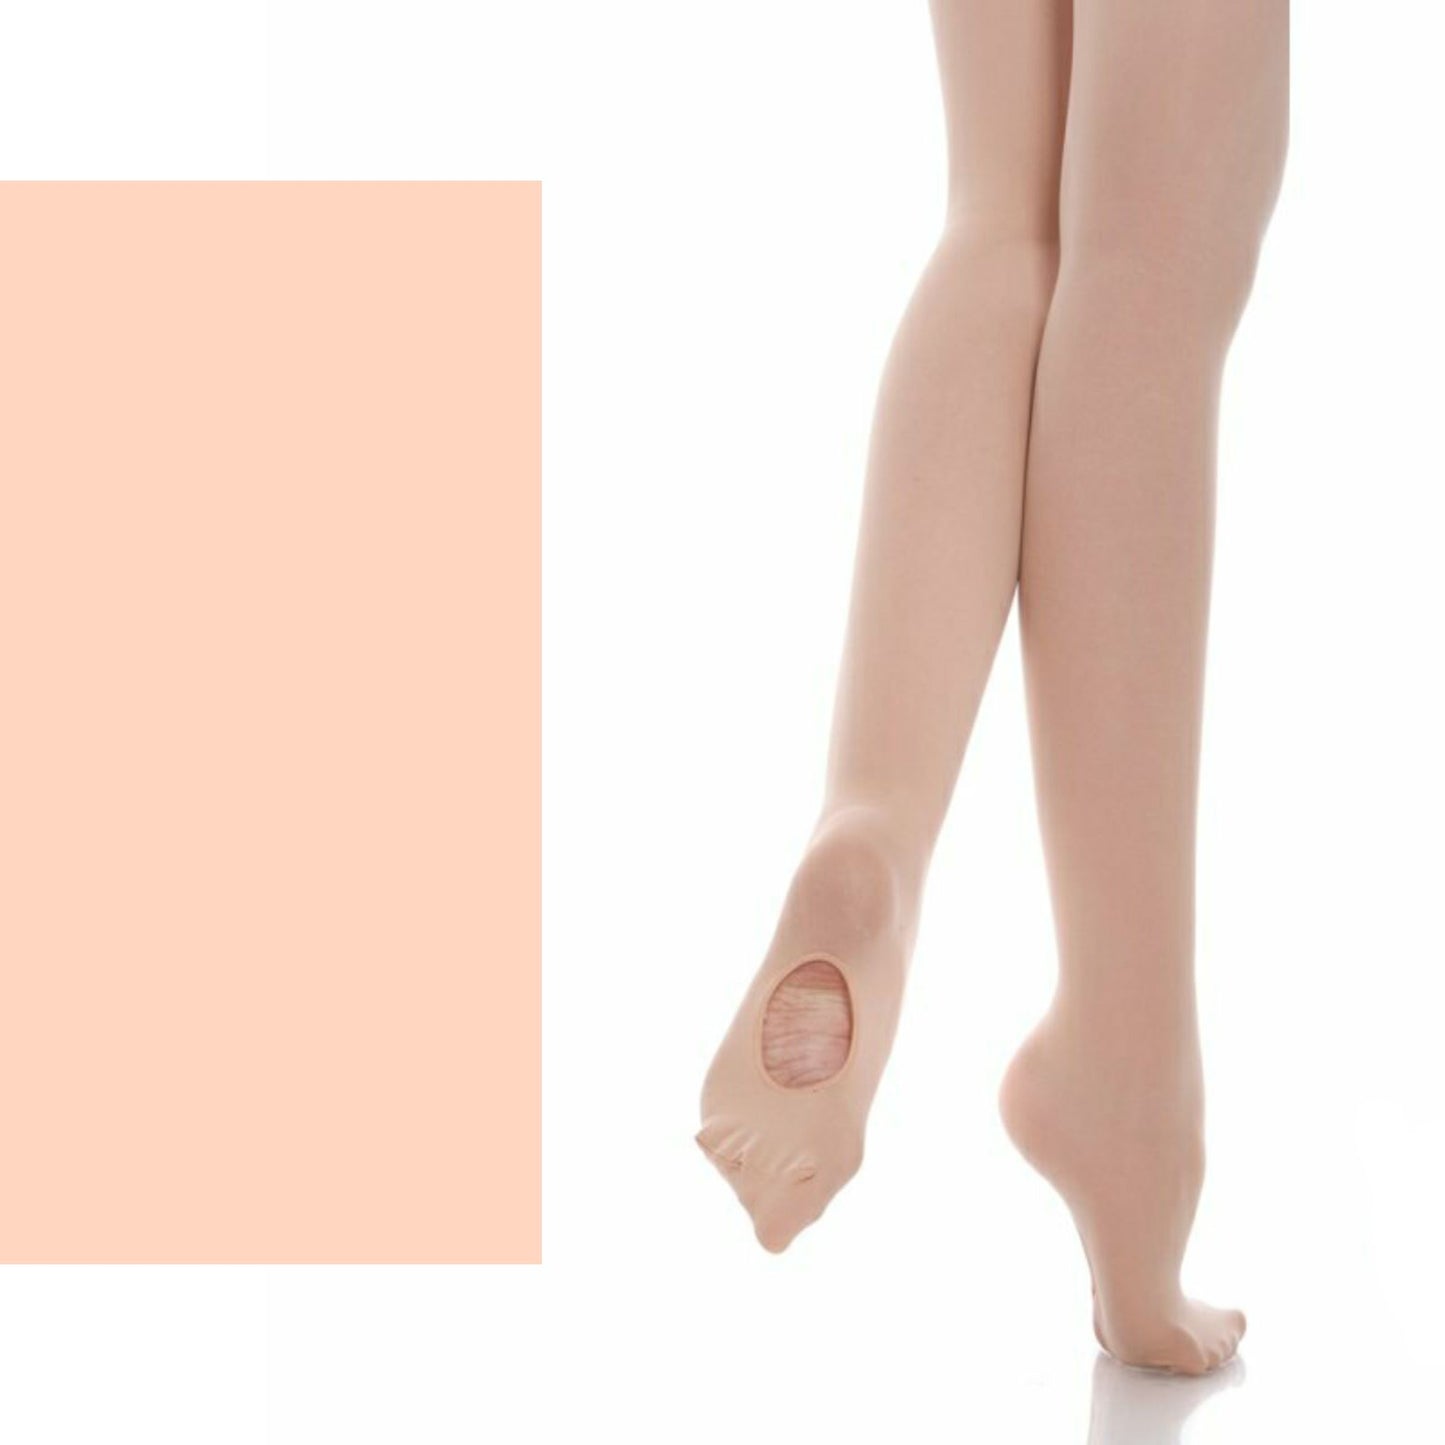 'SILKY' BRAND 60 DENIER CONVERTIBLE BALLET DANCE TIGHTS Tights & Socks Silky Theatrical Pink Age 3-5 